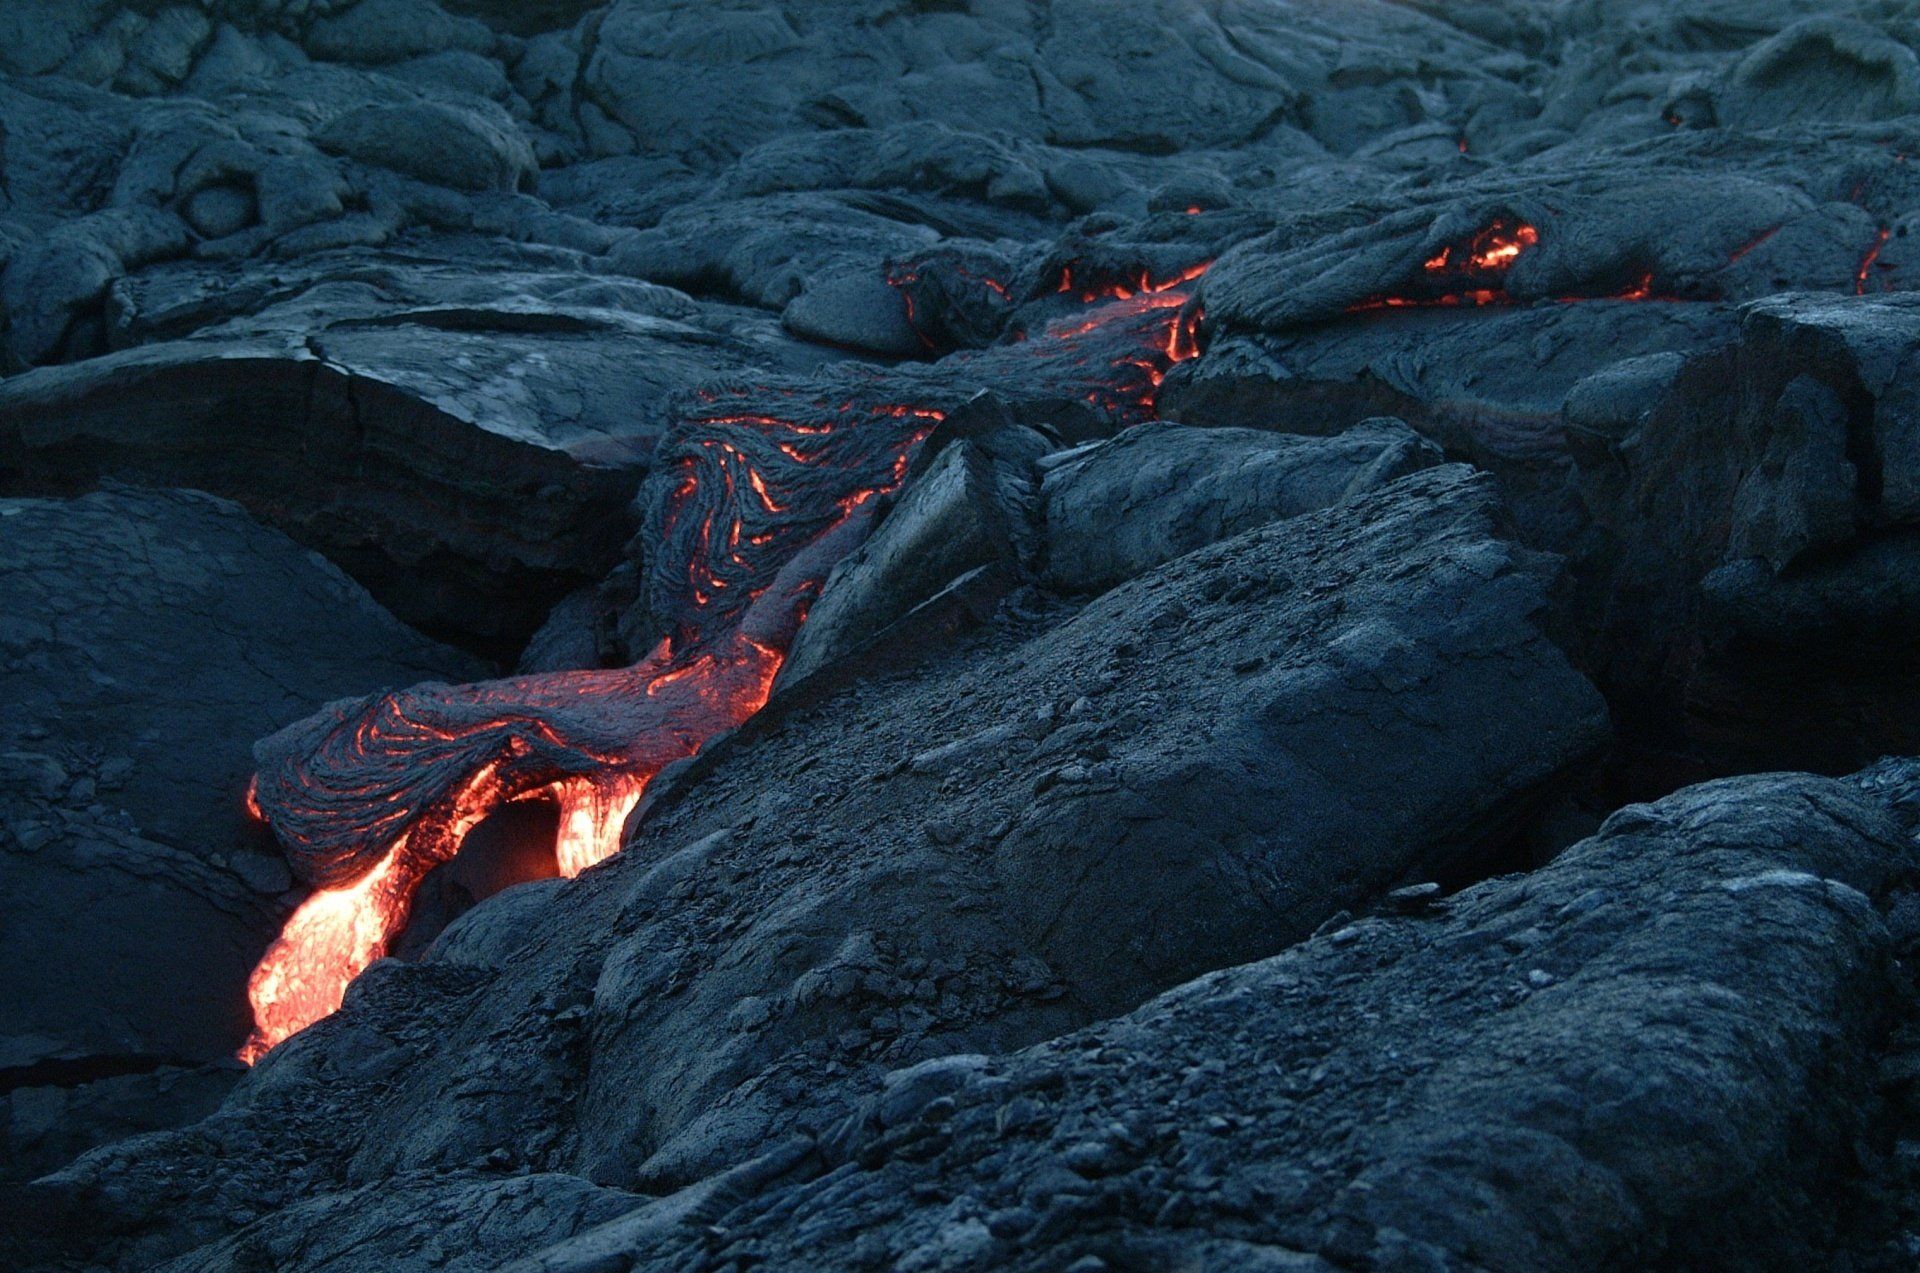 A large pile of rocks with lava coming out of them.